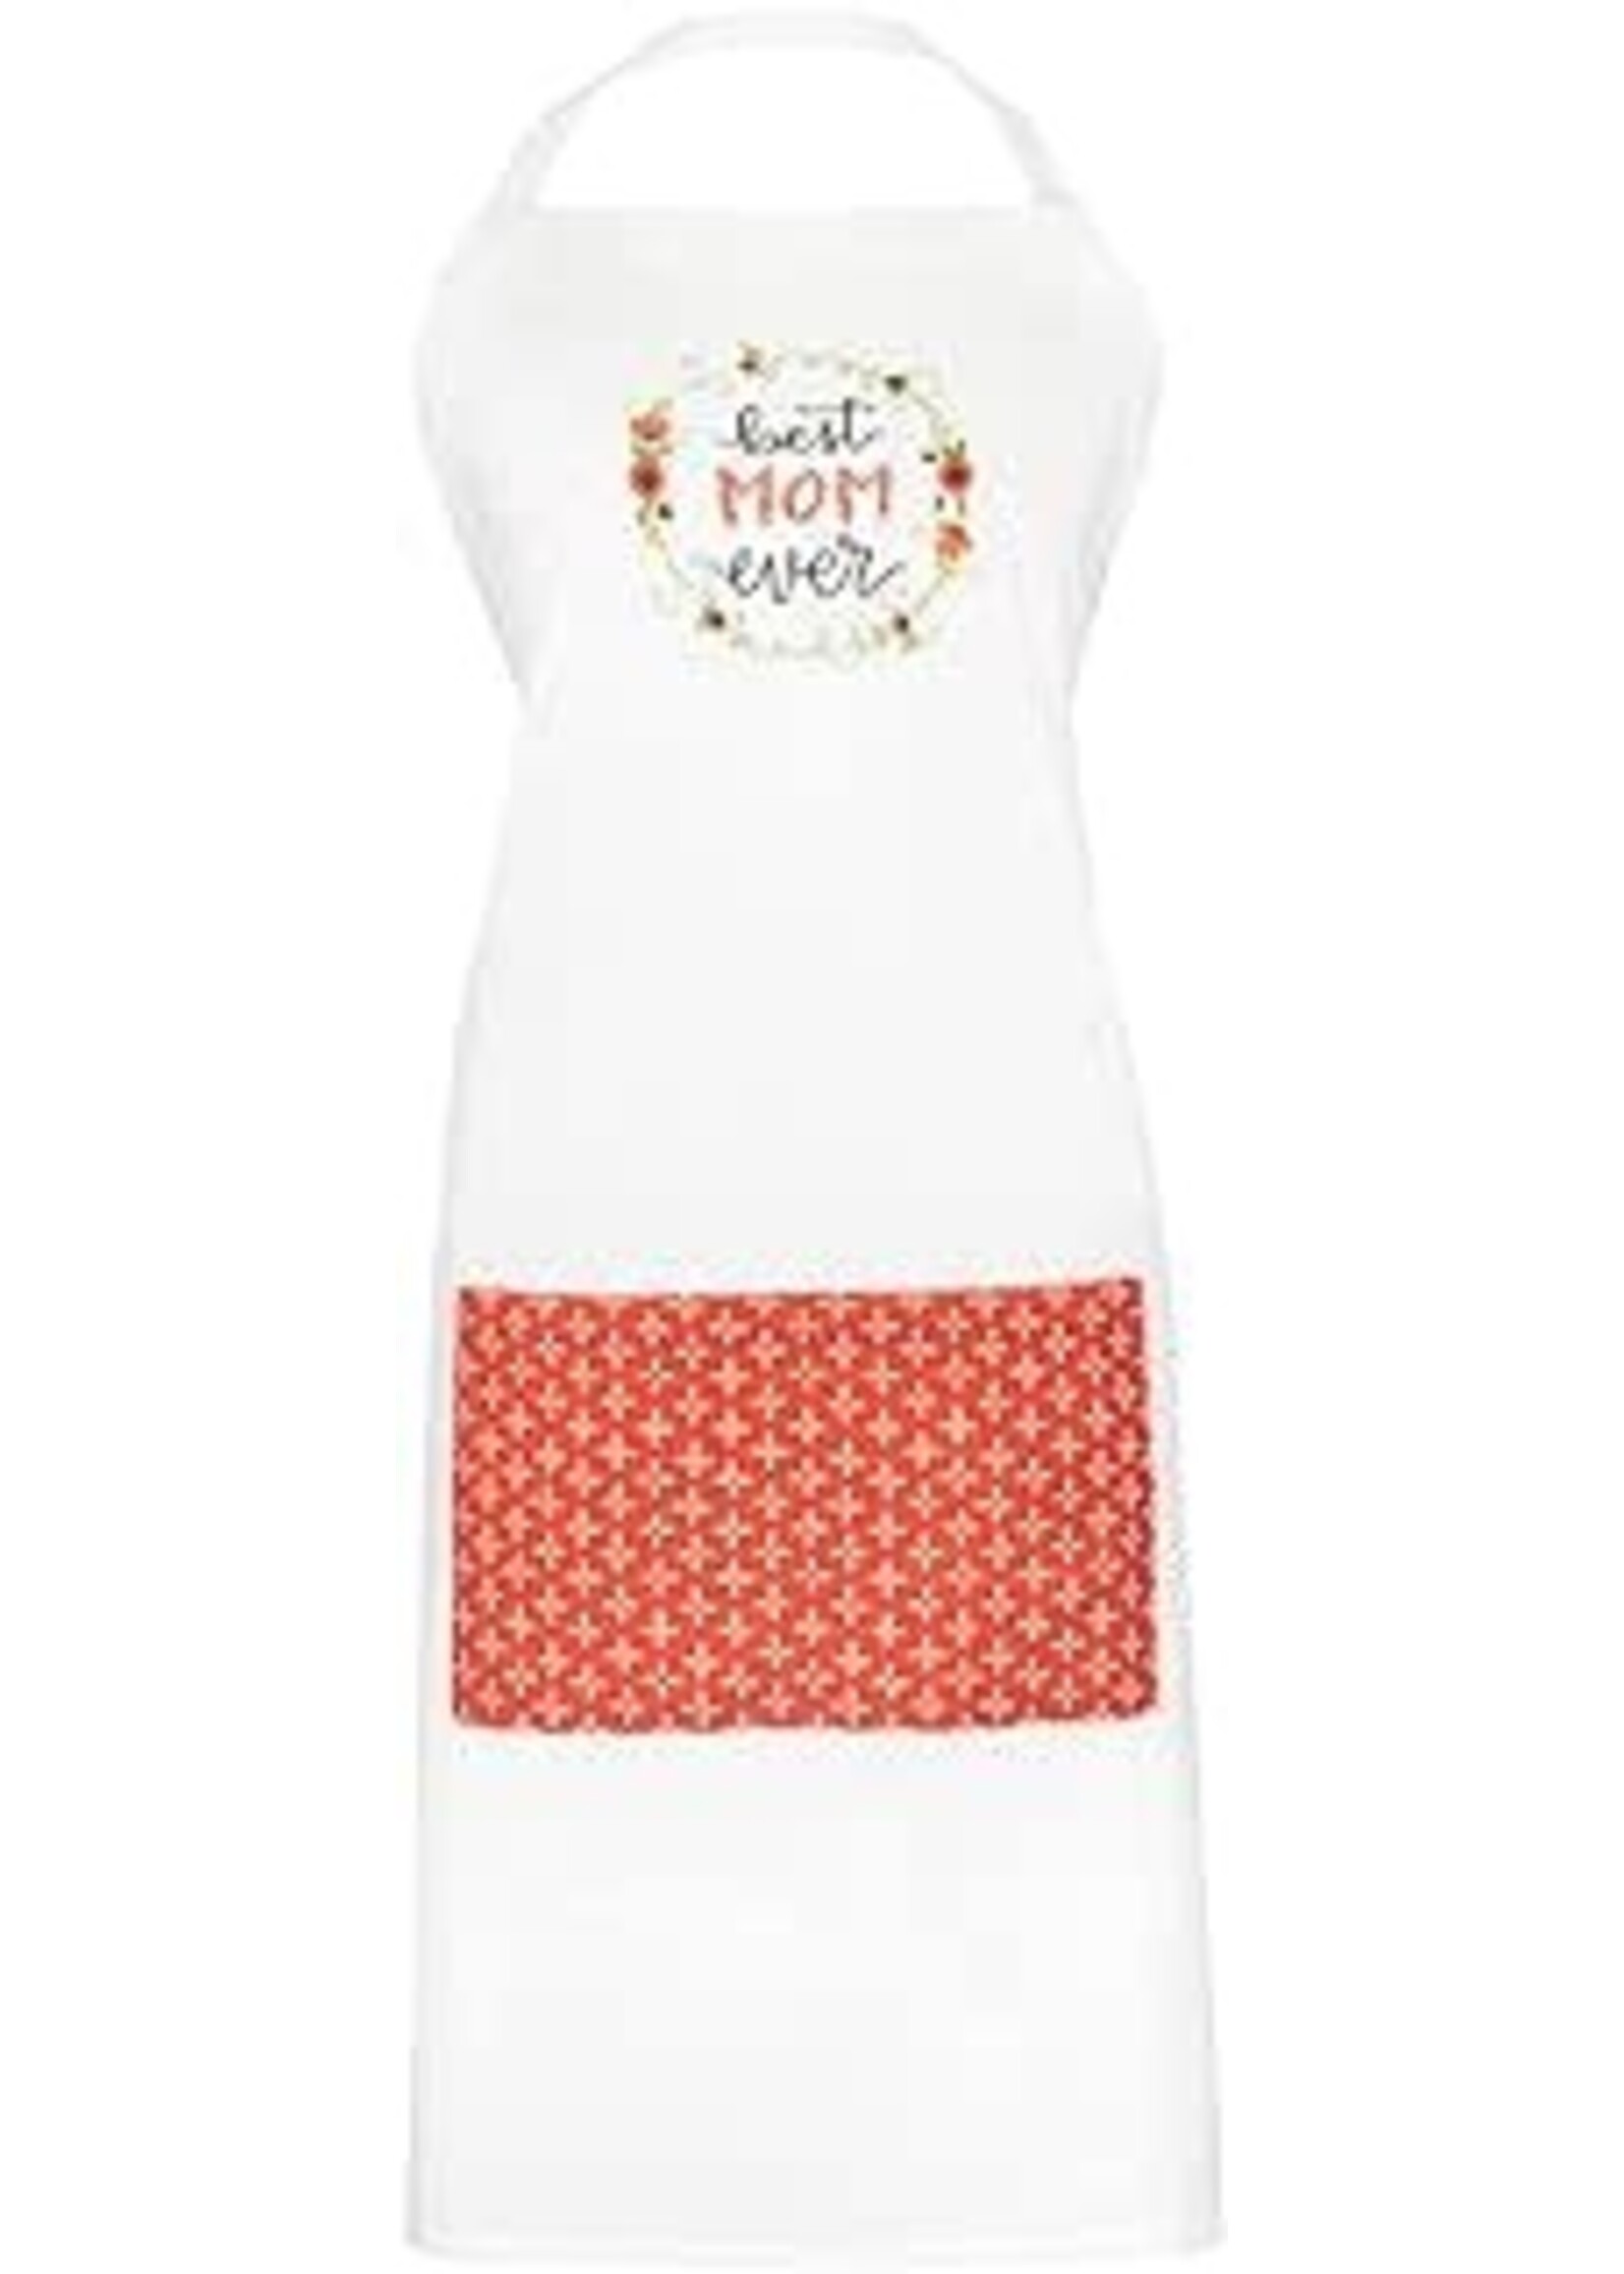 Apron-Best Mom Ever (32.75" x 27.5")